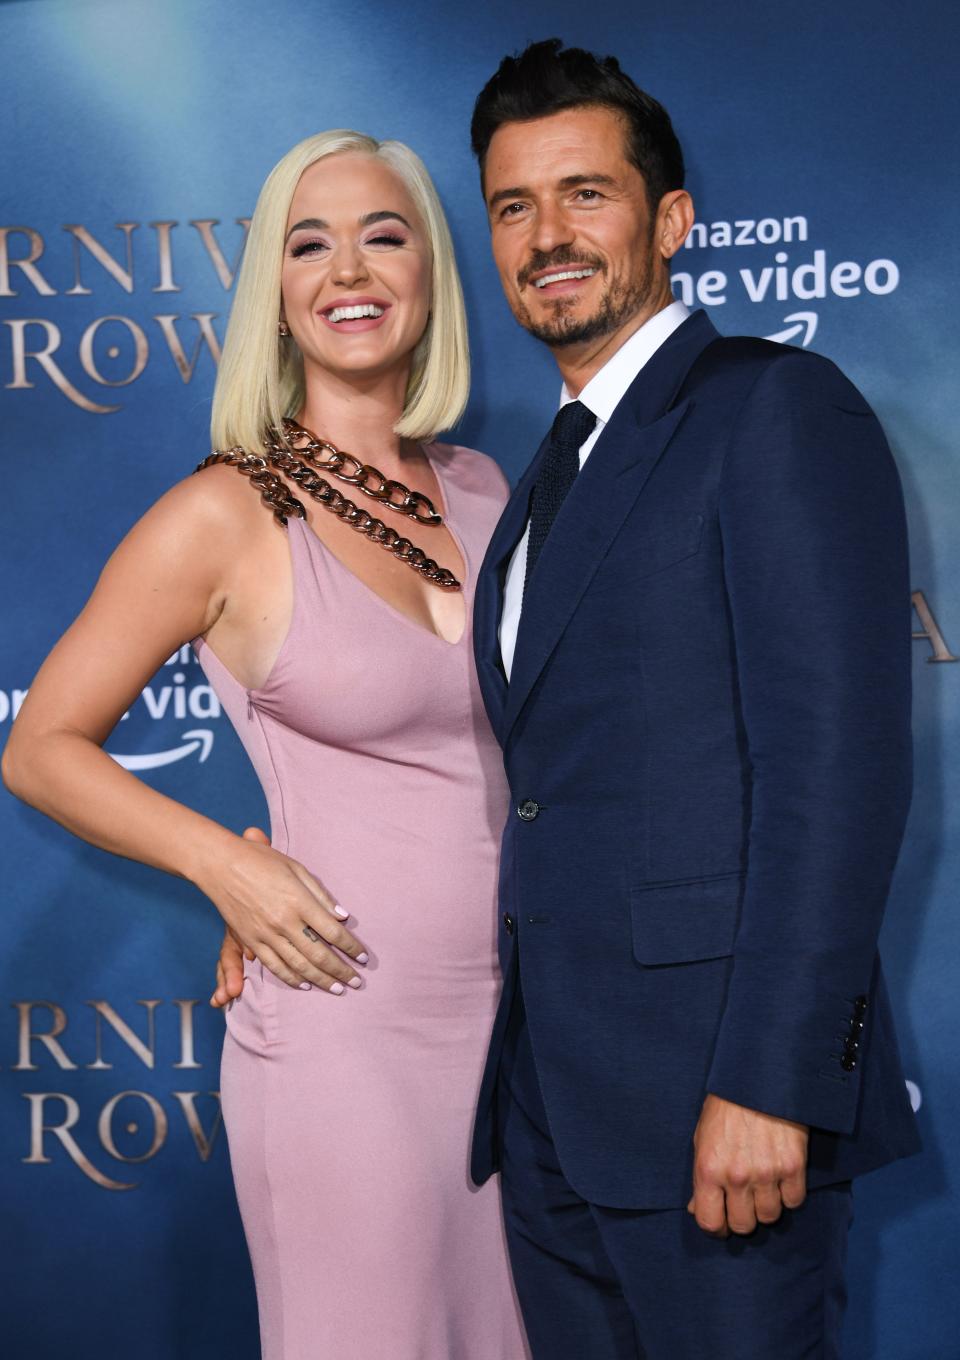 Katy Perry, left, gave a glimpse into her enduring relationship with Orlando Bloom in an Instagram post Saturday. "We continuously put in the work," Perry wrote.